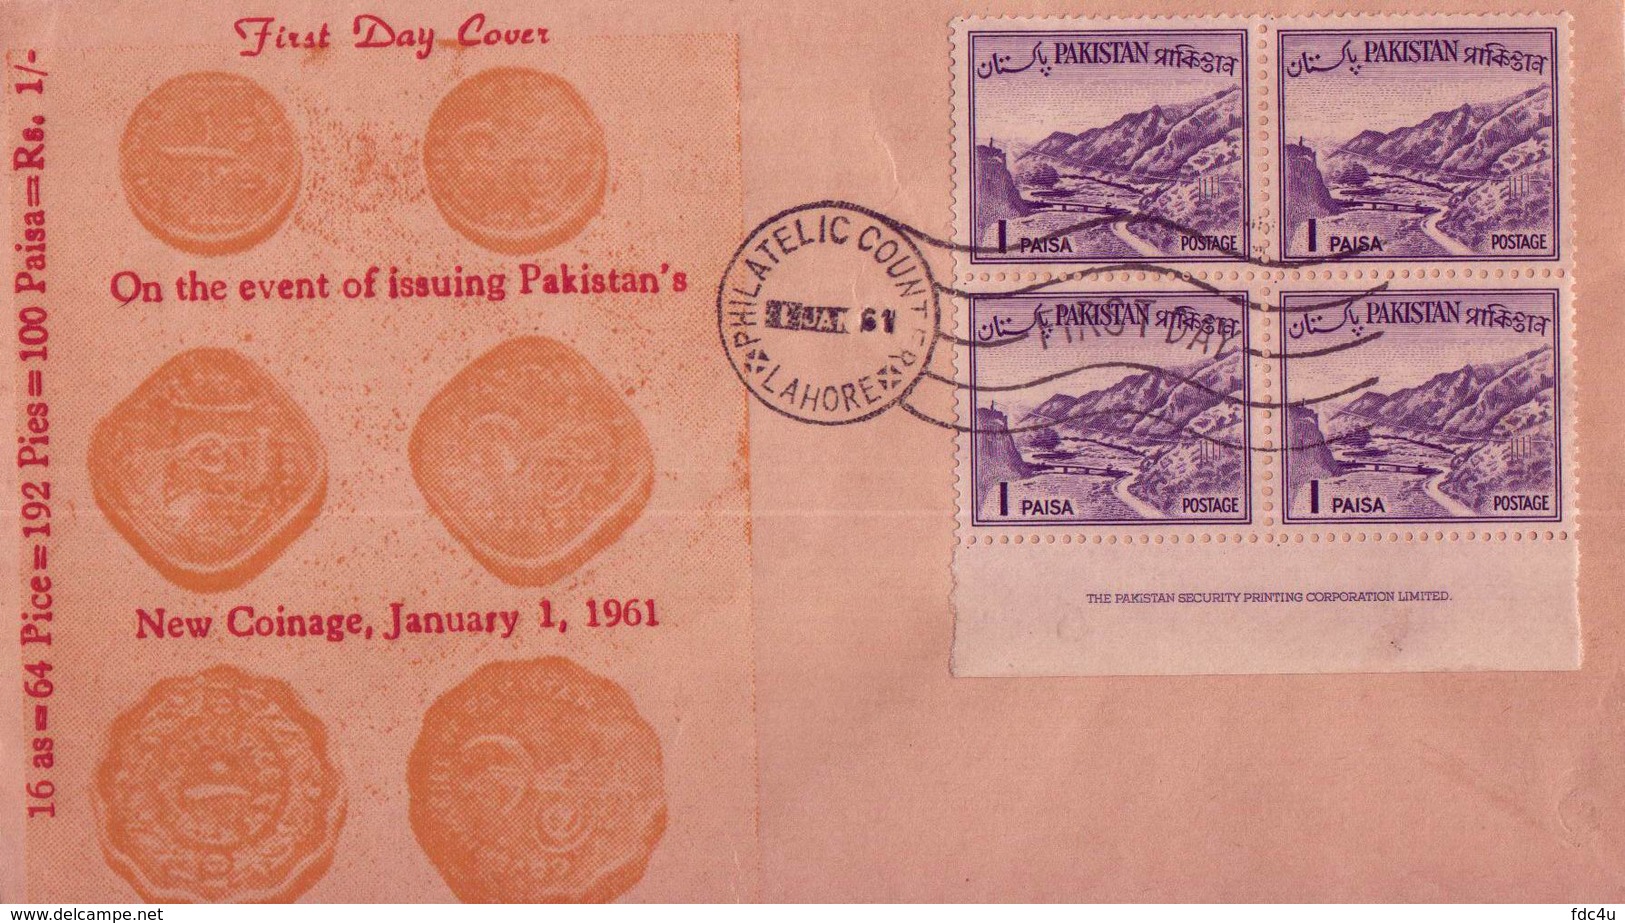 Pakistan Fdc 1961 & Stamps Currency Changed 100 Paisa = Rs. 1.00 Coins On Fdc - Pakistan